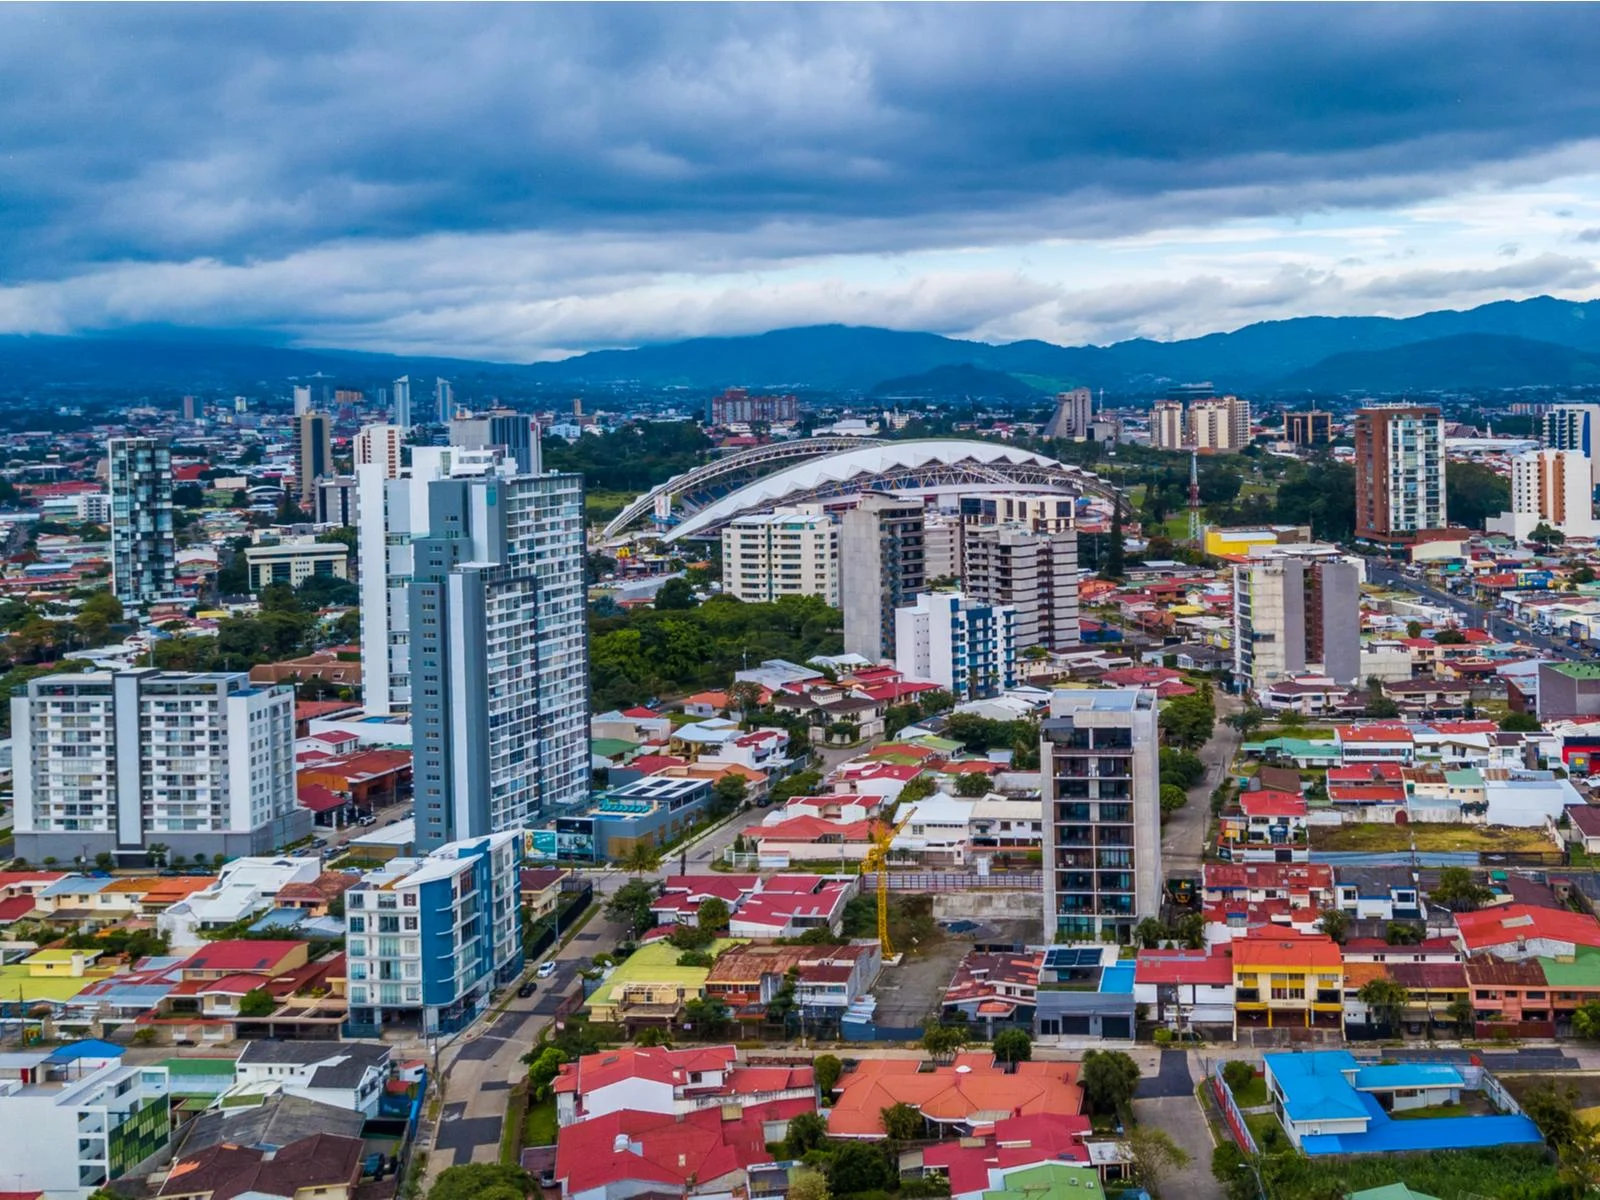 Aerial view of the rich San Jose Downtown with its mountain skyline during an overcast day, one of the best things to do in Costa Rica